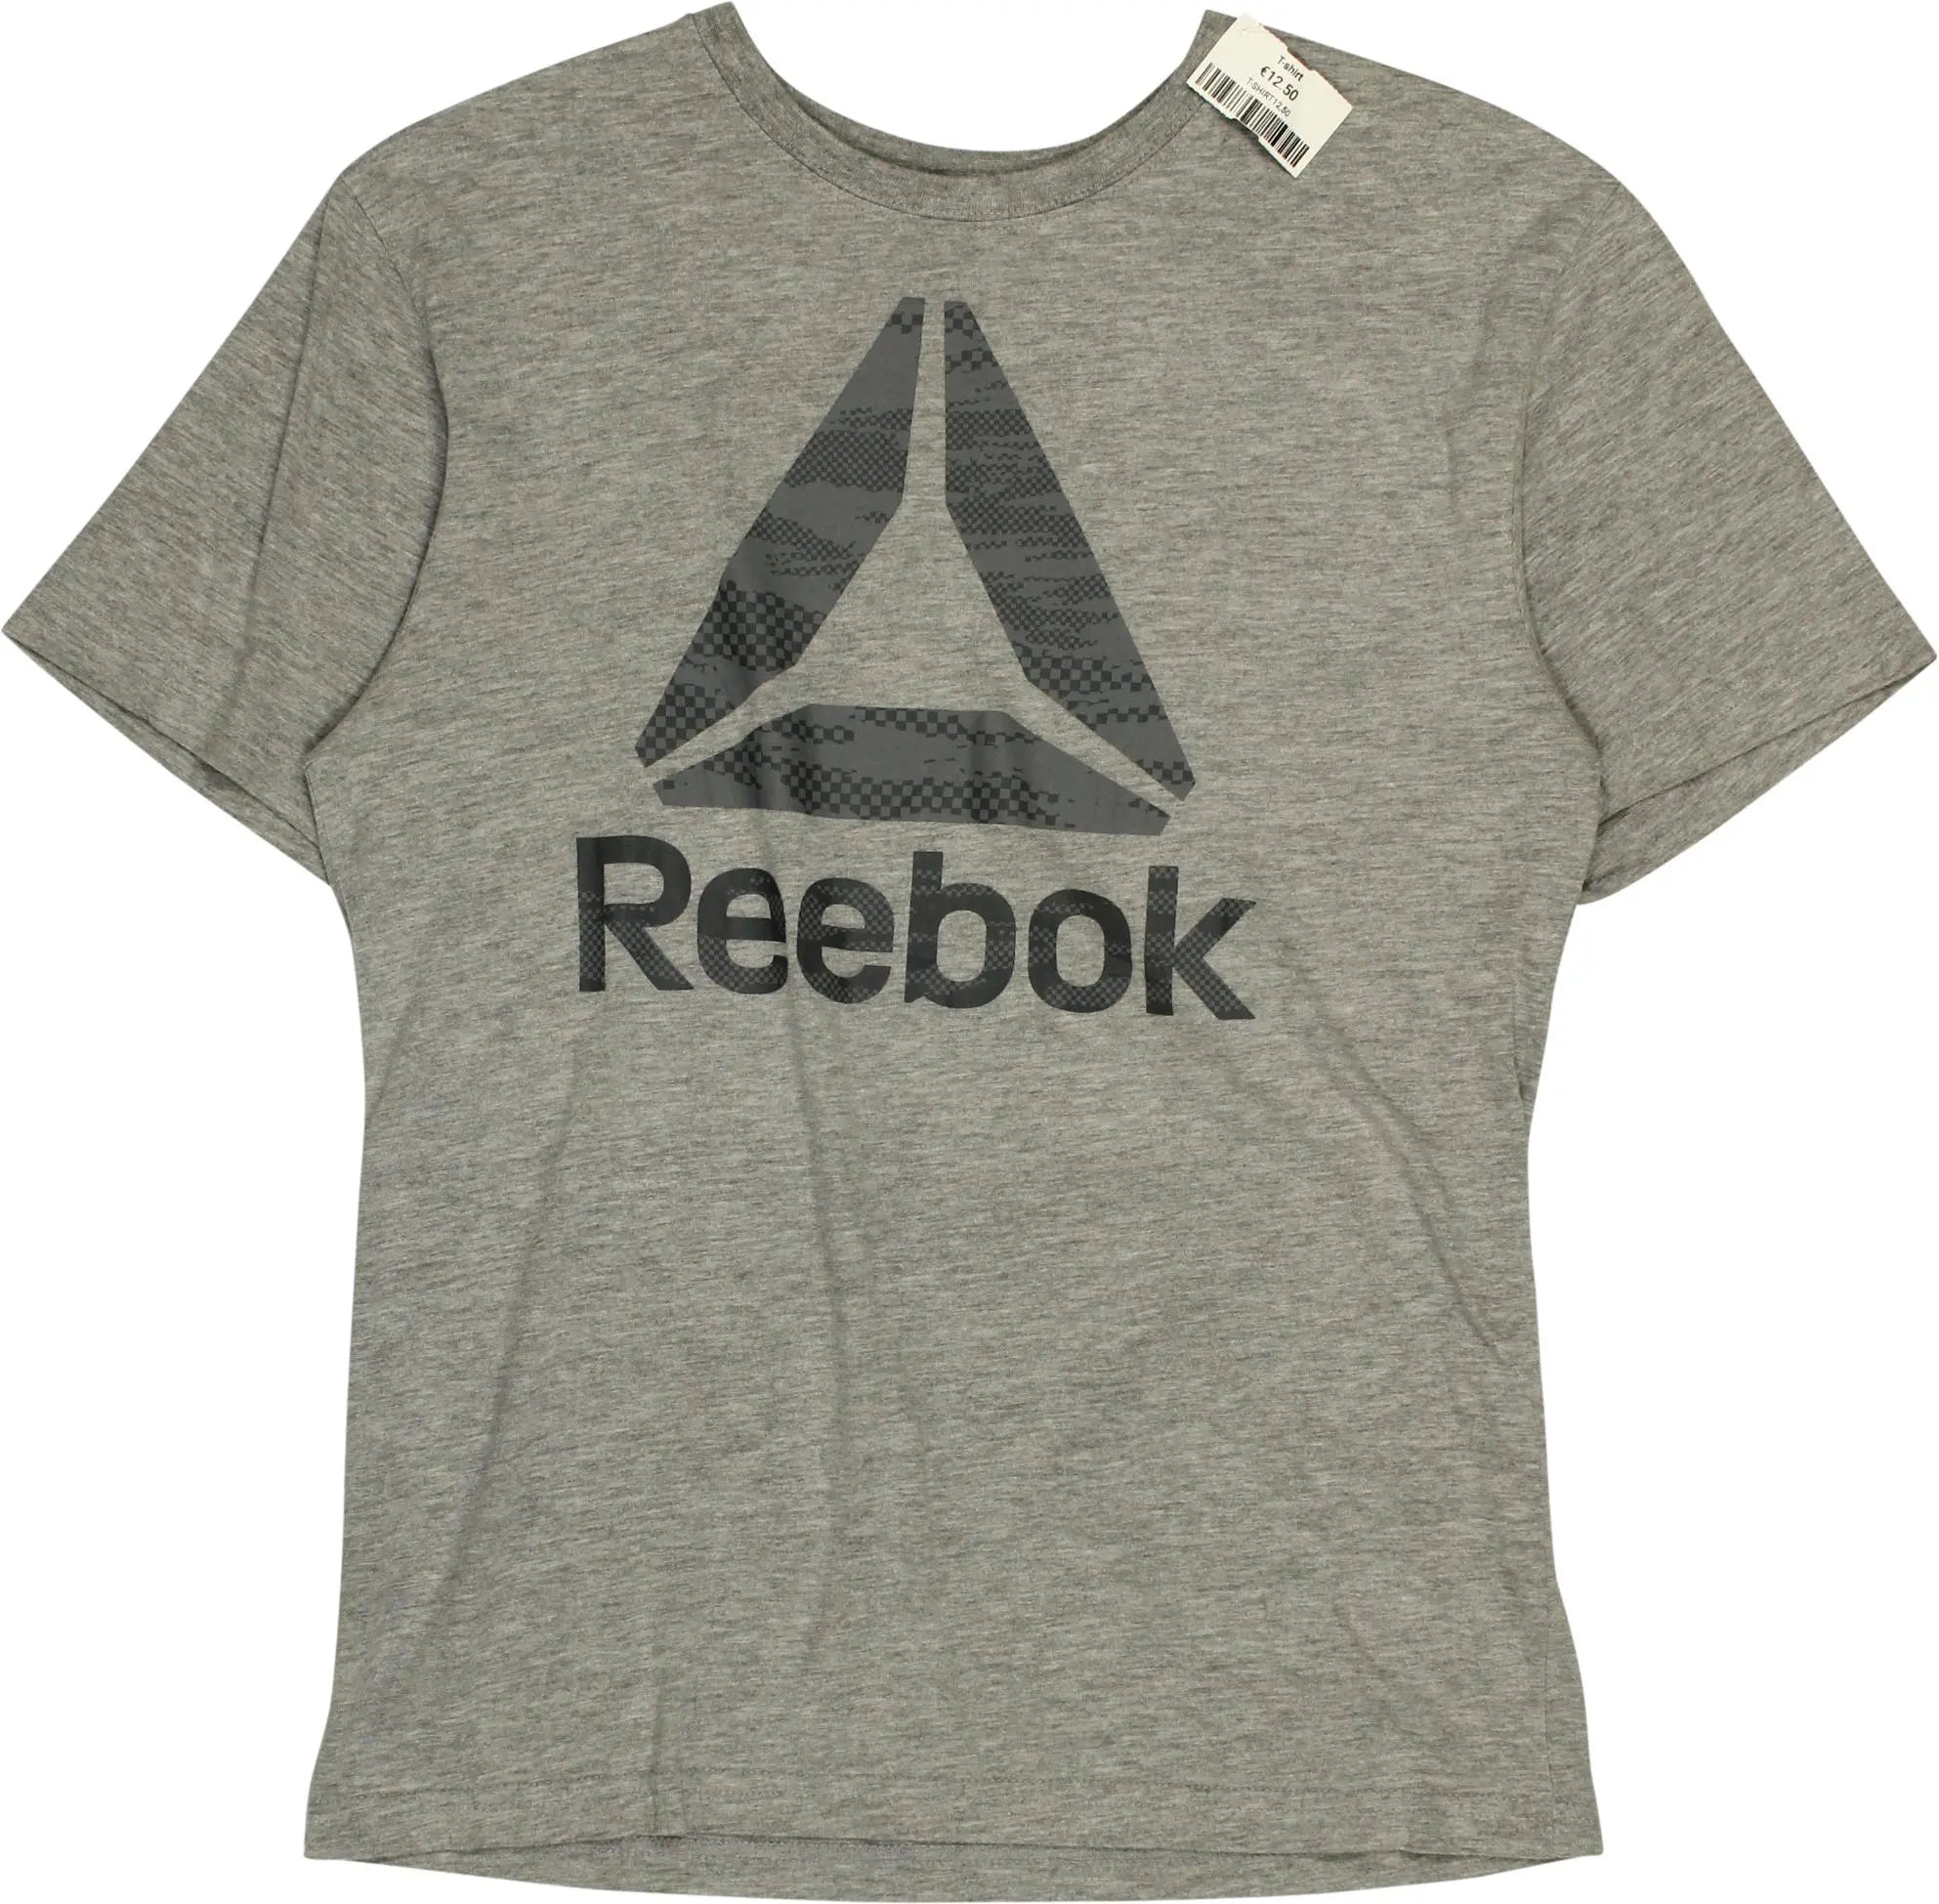 Reebok - T-shirt- ThriftTale.com - Vintage and second handclothing